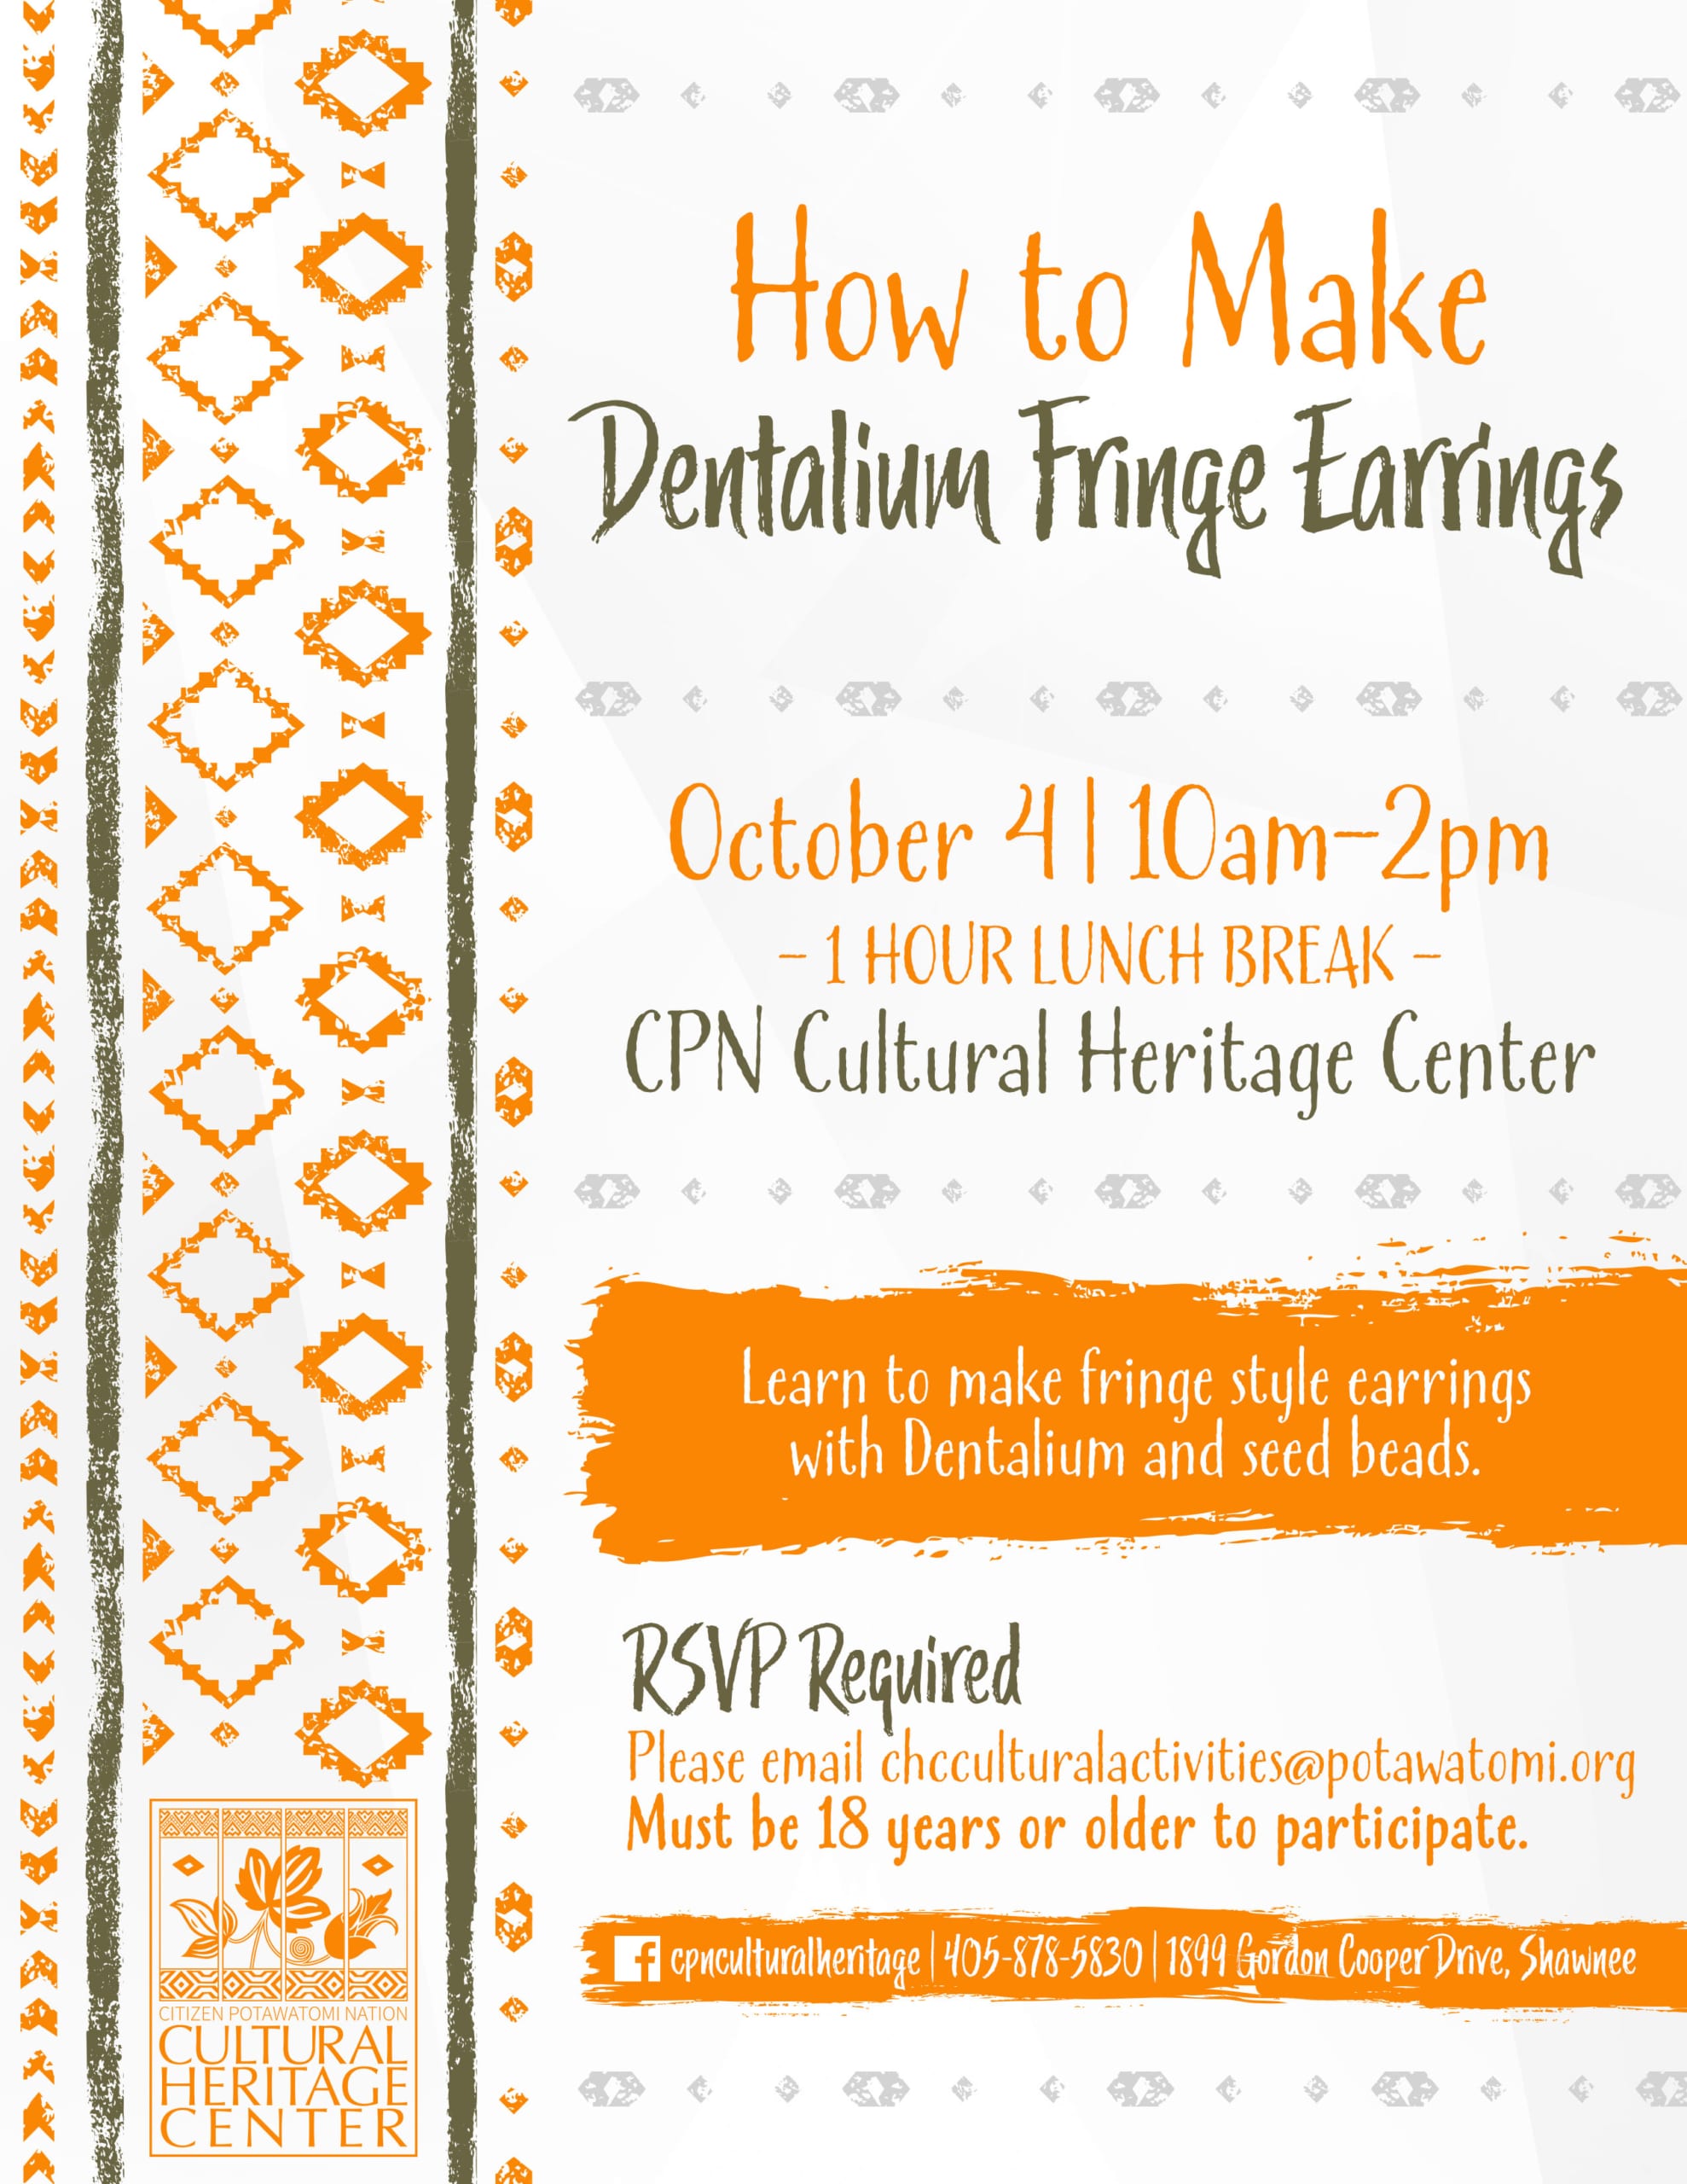 green and orange geometric designs frame event details for the October 4 cultural activities class on how to make dentalium fringe earrings.